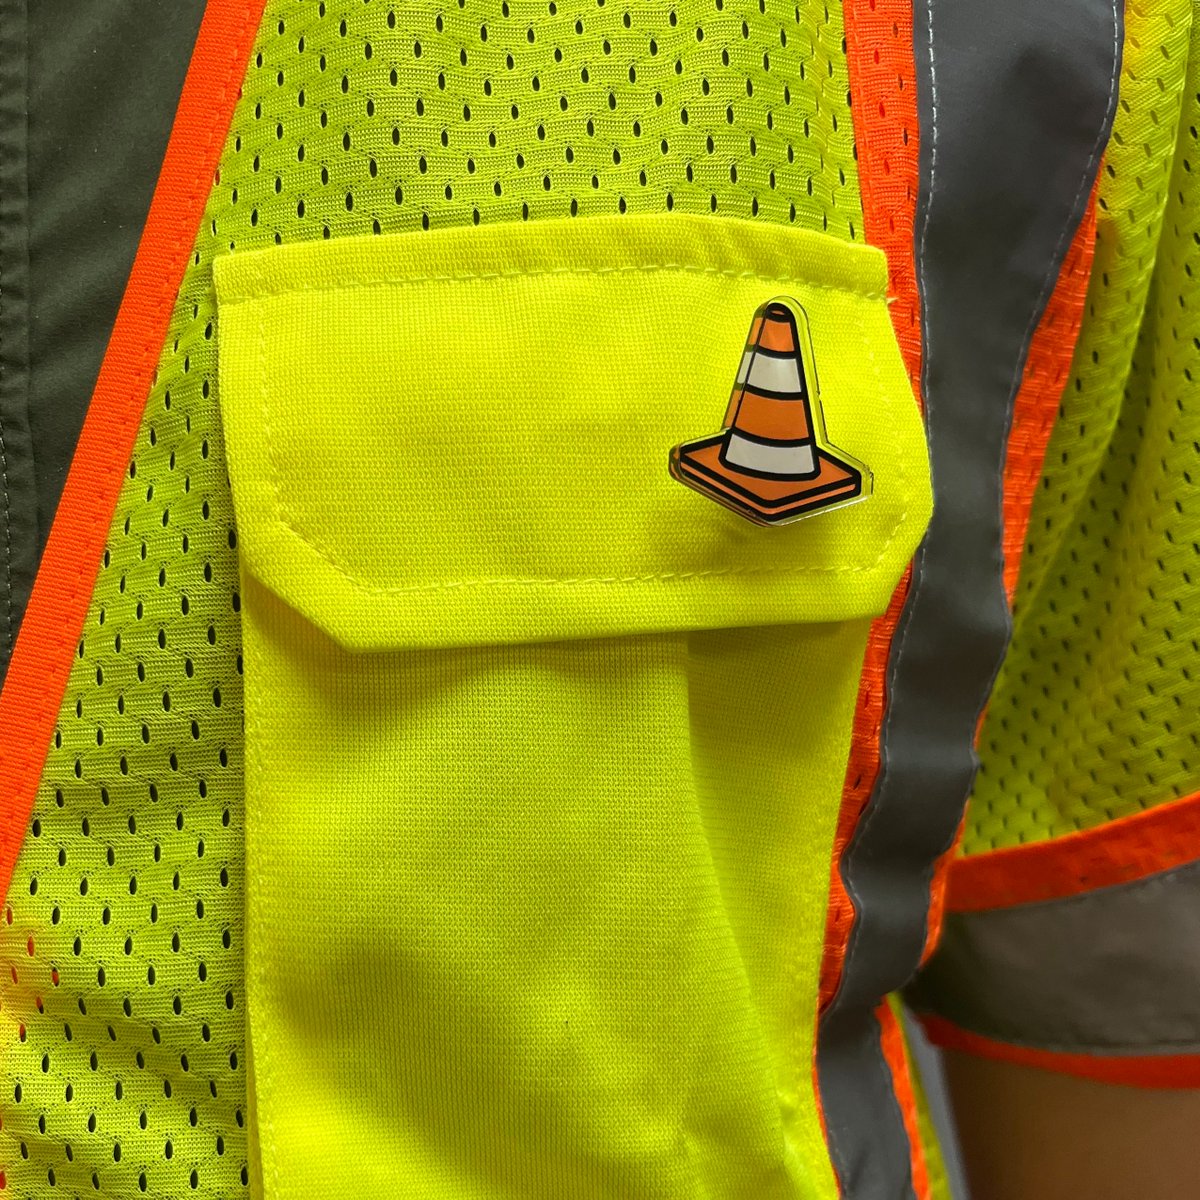 This week is National Work Zone Awareness Week. When traveling through work zones, please remember to keep two hands on the wheel and drive safely. We all want to get home safely! Wear orange on Wednesday to show your support! #Orange4Safety #NWZAW